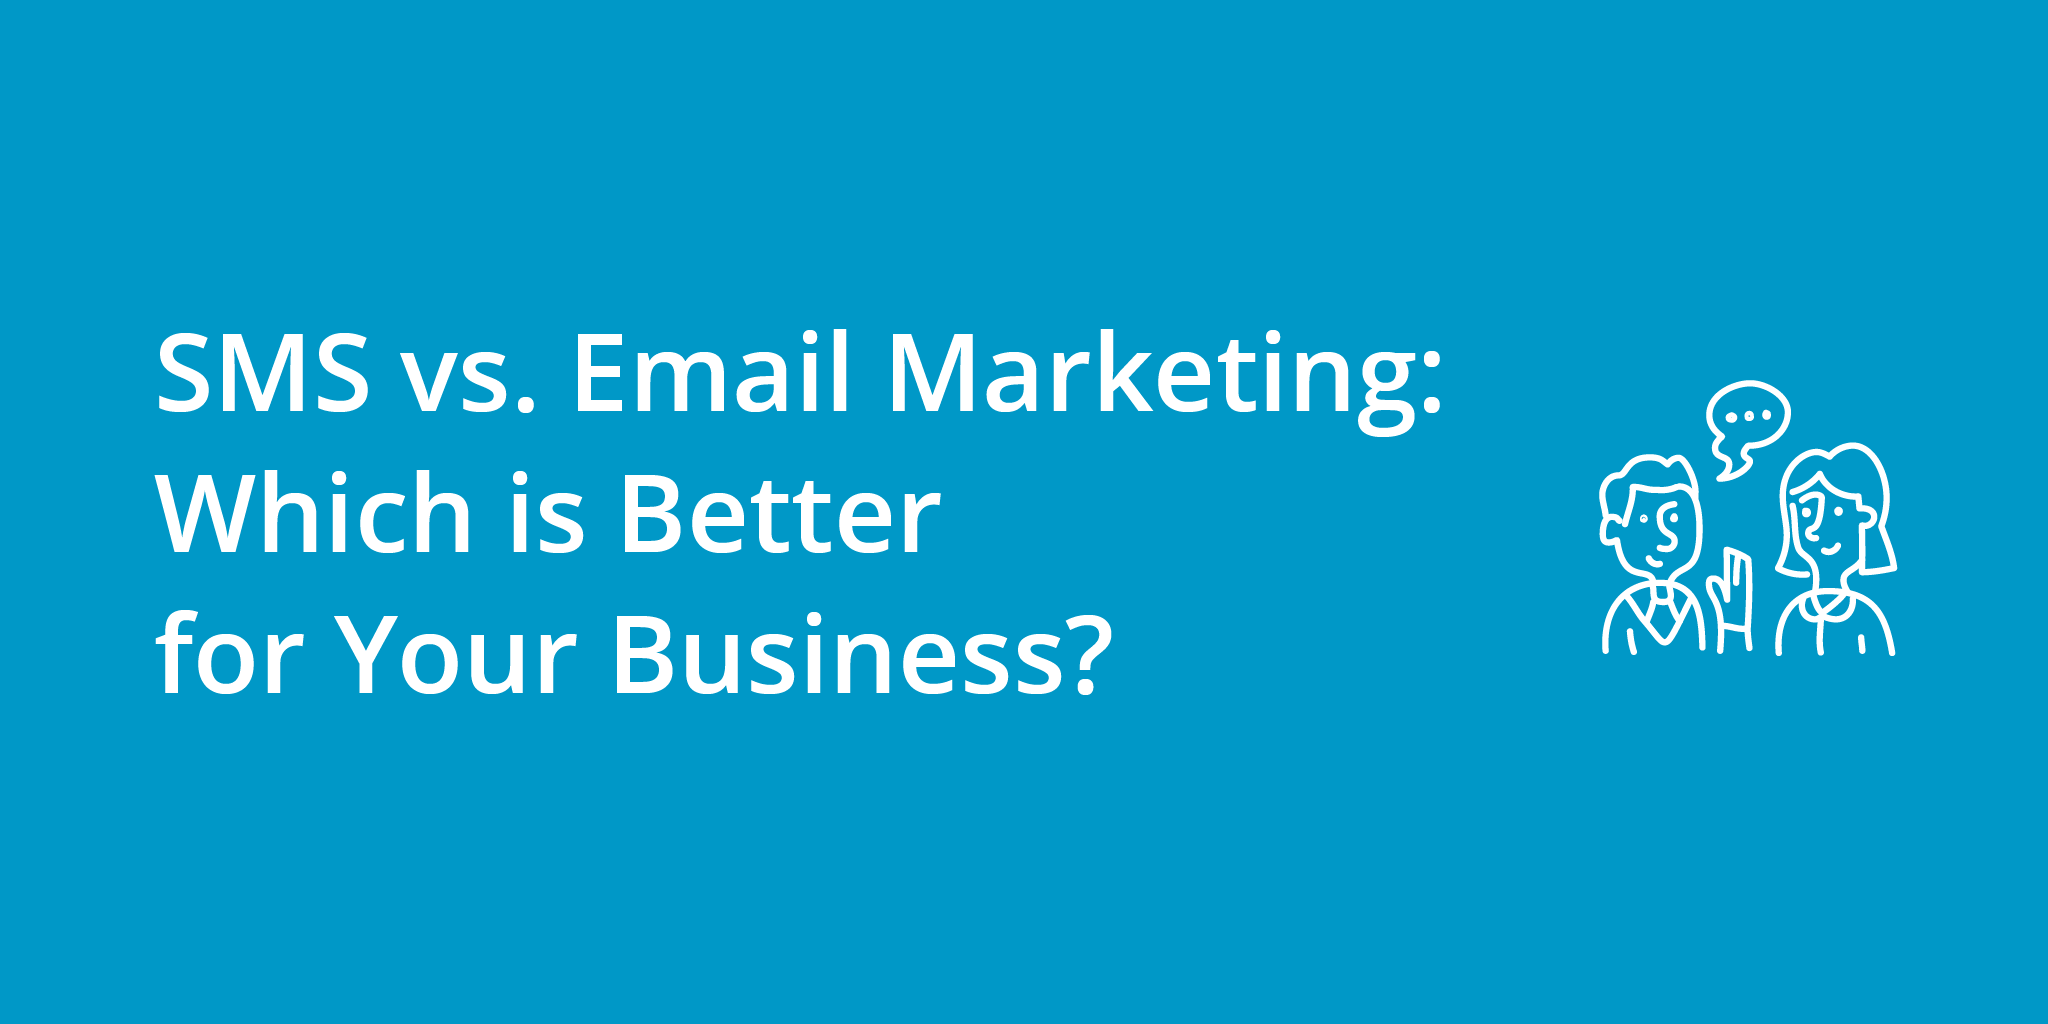 SMS vs. Email Marketing: Which is Better for Your Business? | Telephones for business